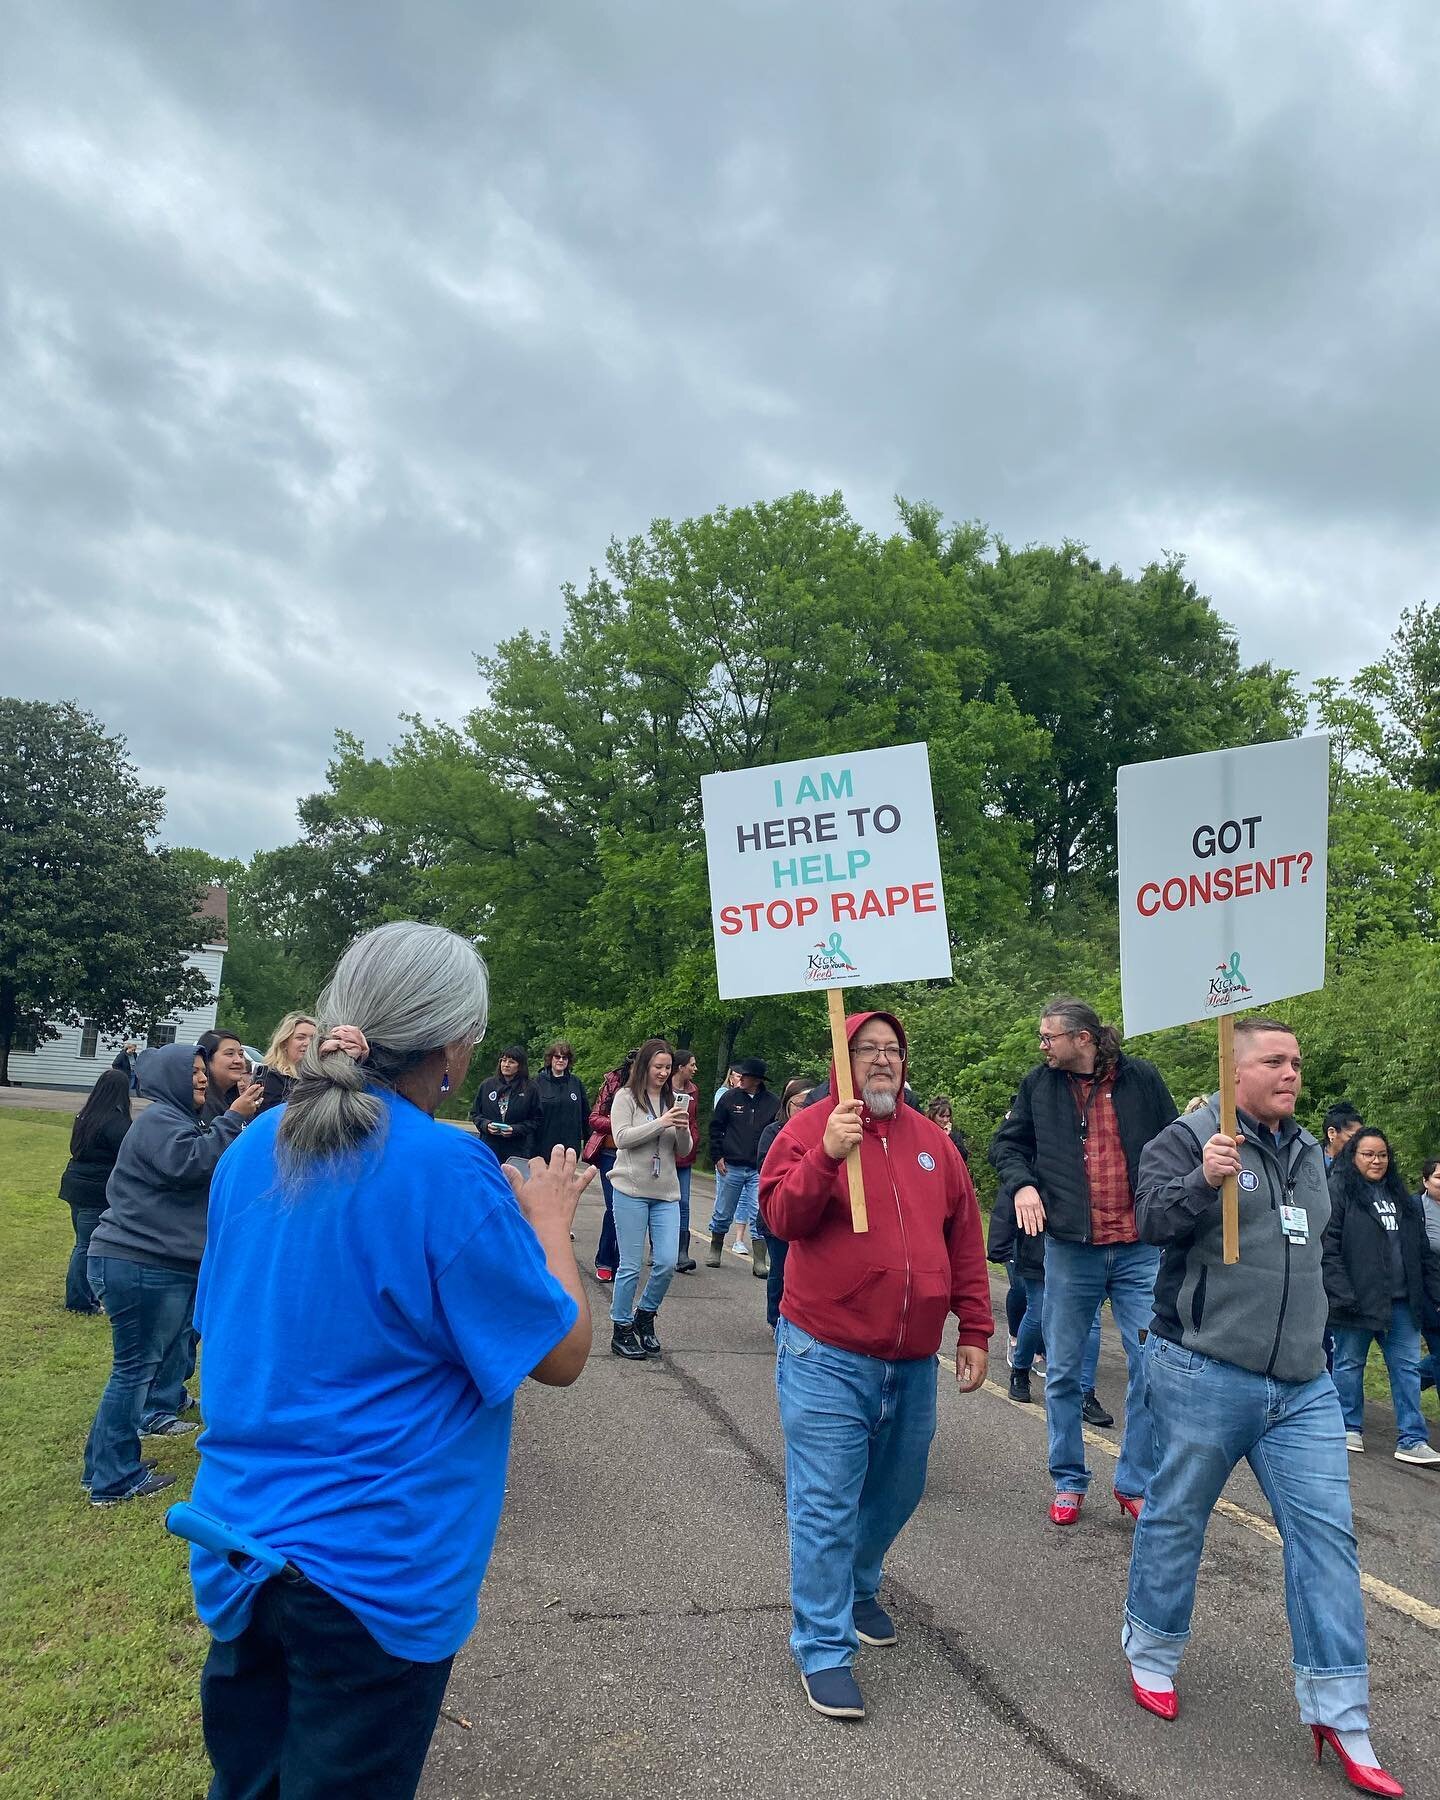 Our Education Coordinator traveled to the Choctaw Nation&rsquo;s sexual assault awareness month event yesterday and got some pictures of the awareness walk that encouraged men to walk in high heeled shoes in solidarity with survivors of sexual assaul